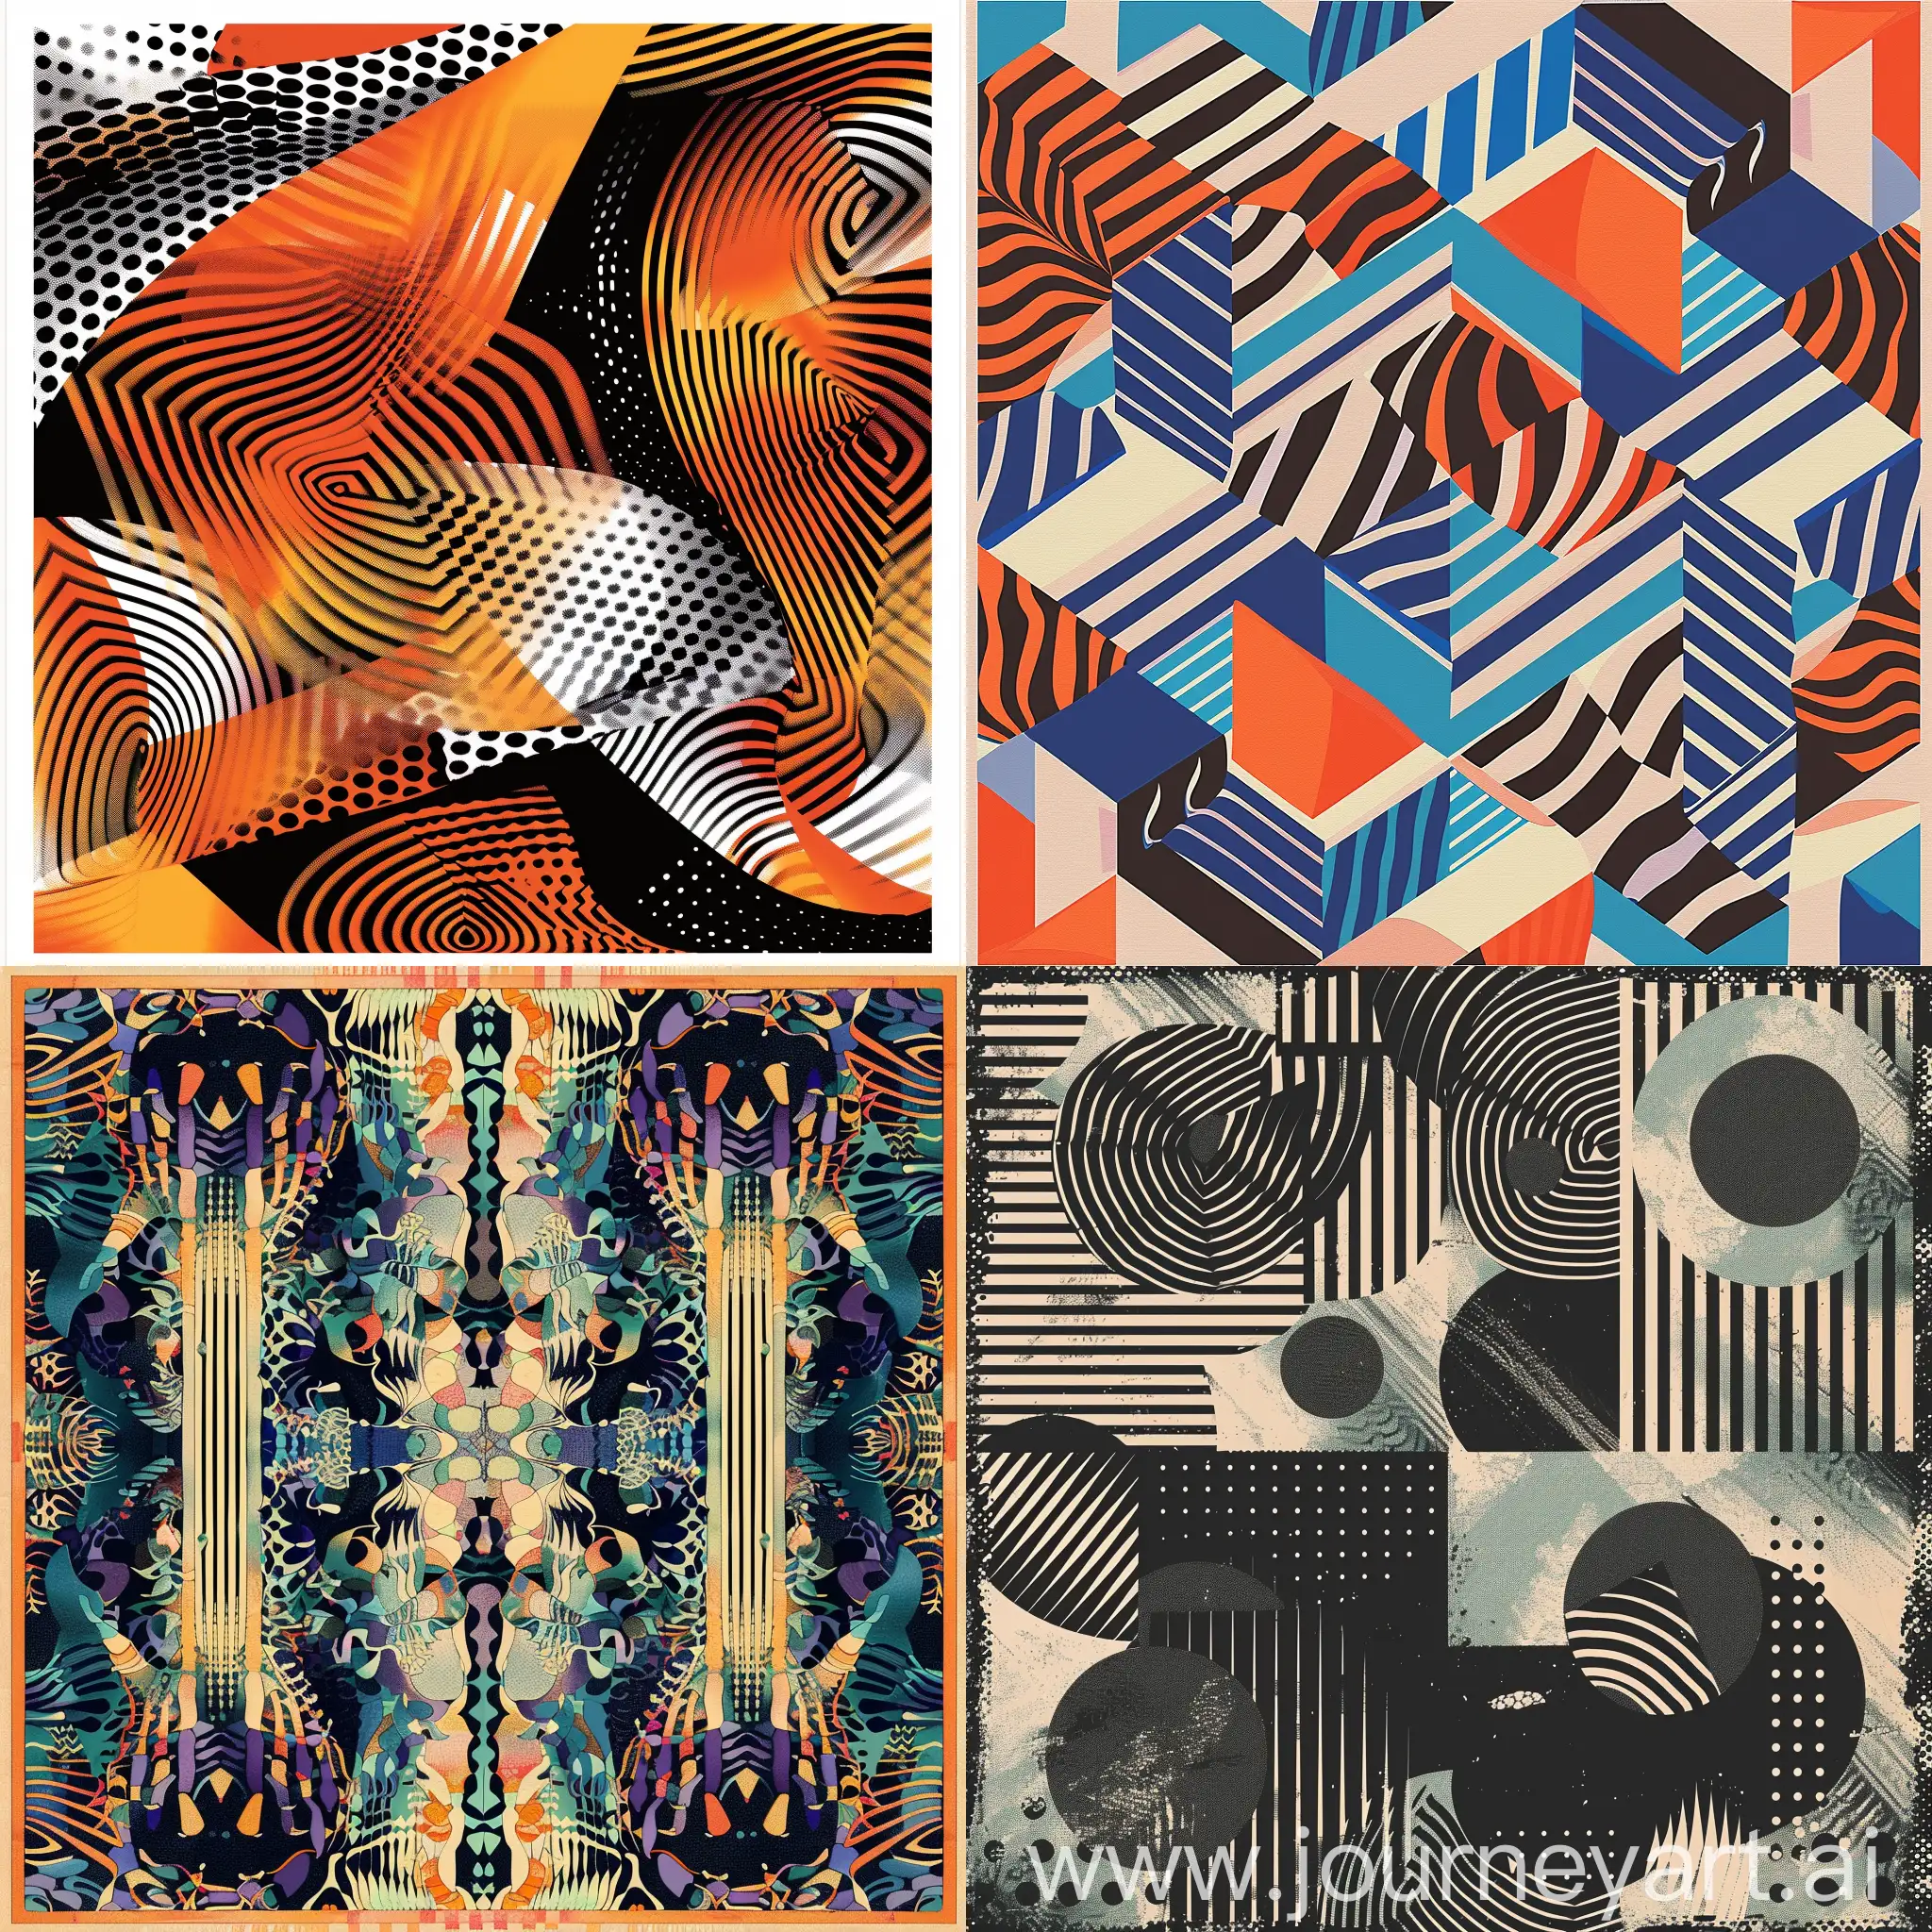 Abstract-Poster-with-Geometric-Patterns-Digital-Art-in-Processing-IDE